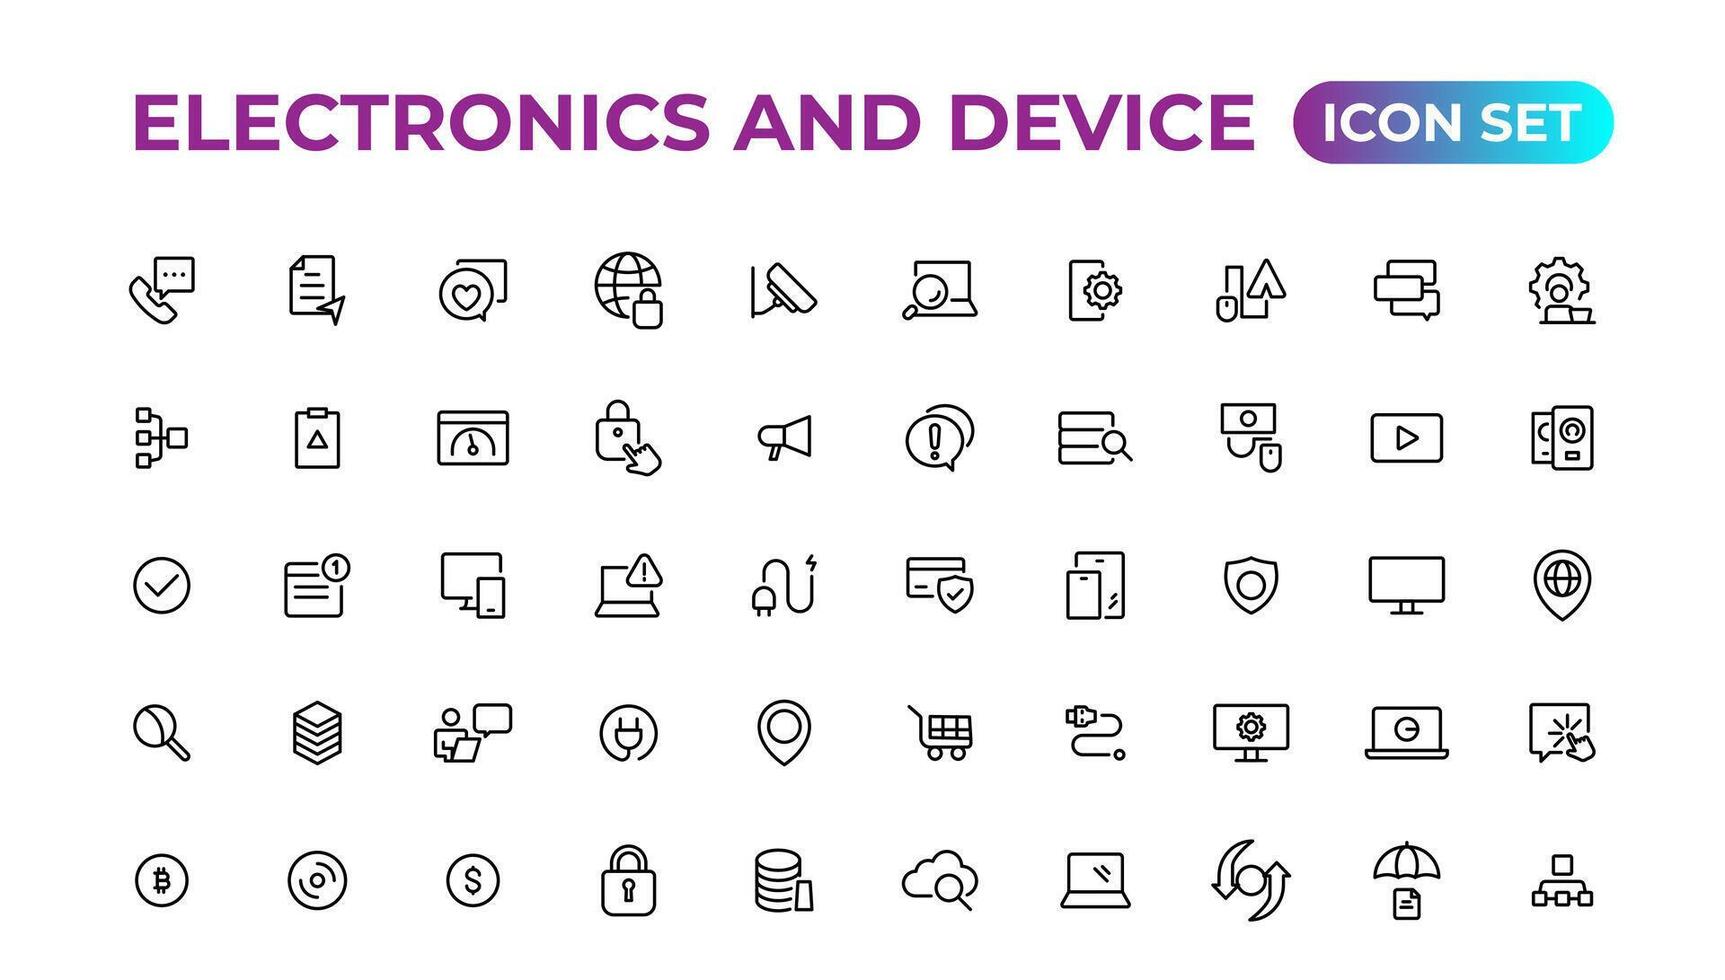 Electronics and device lines icon set. Electronic devices and gadgets, computer, equipment and electronics. Computer monitor, smartphone, tablet and laptop sumbol collection. vector